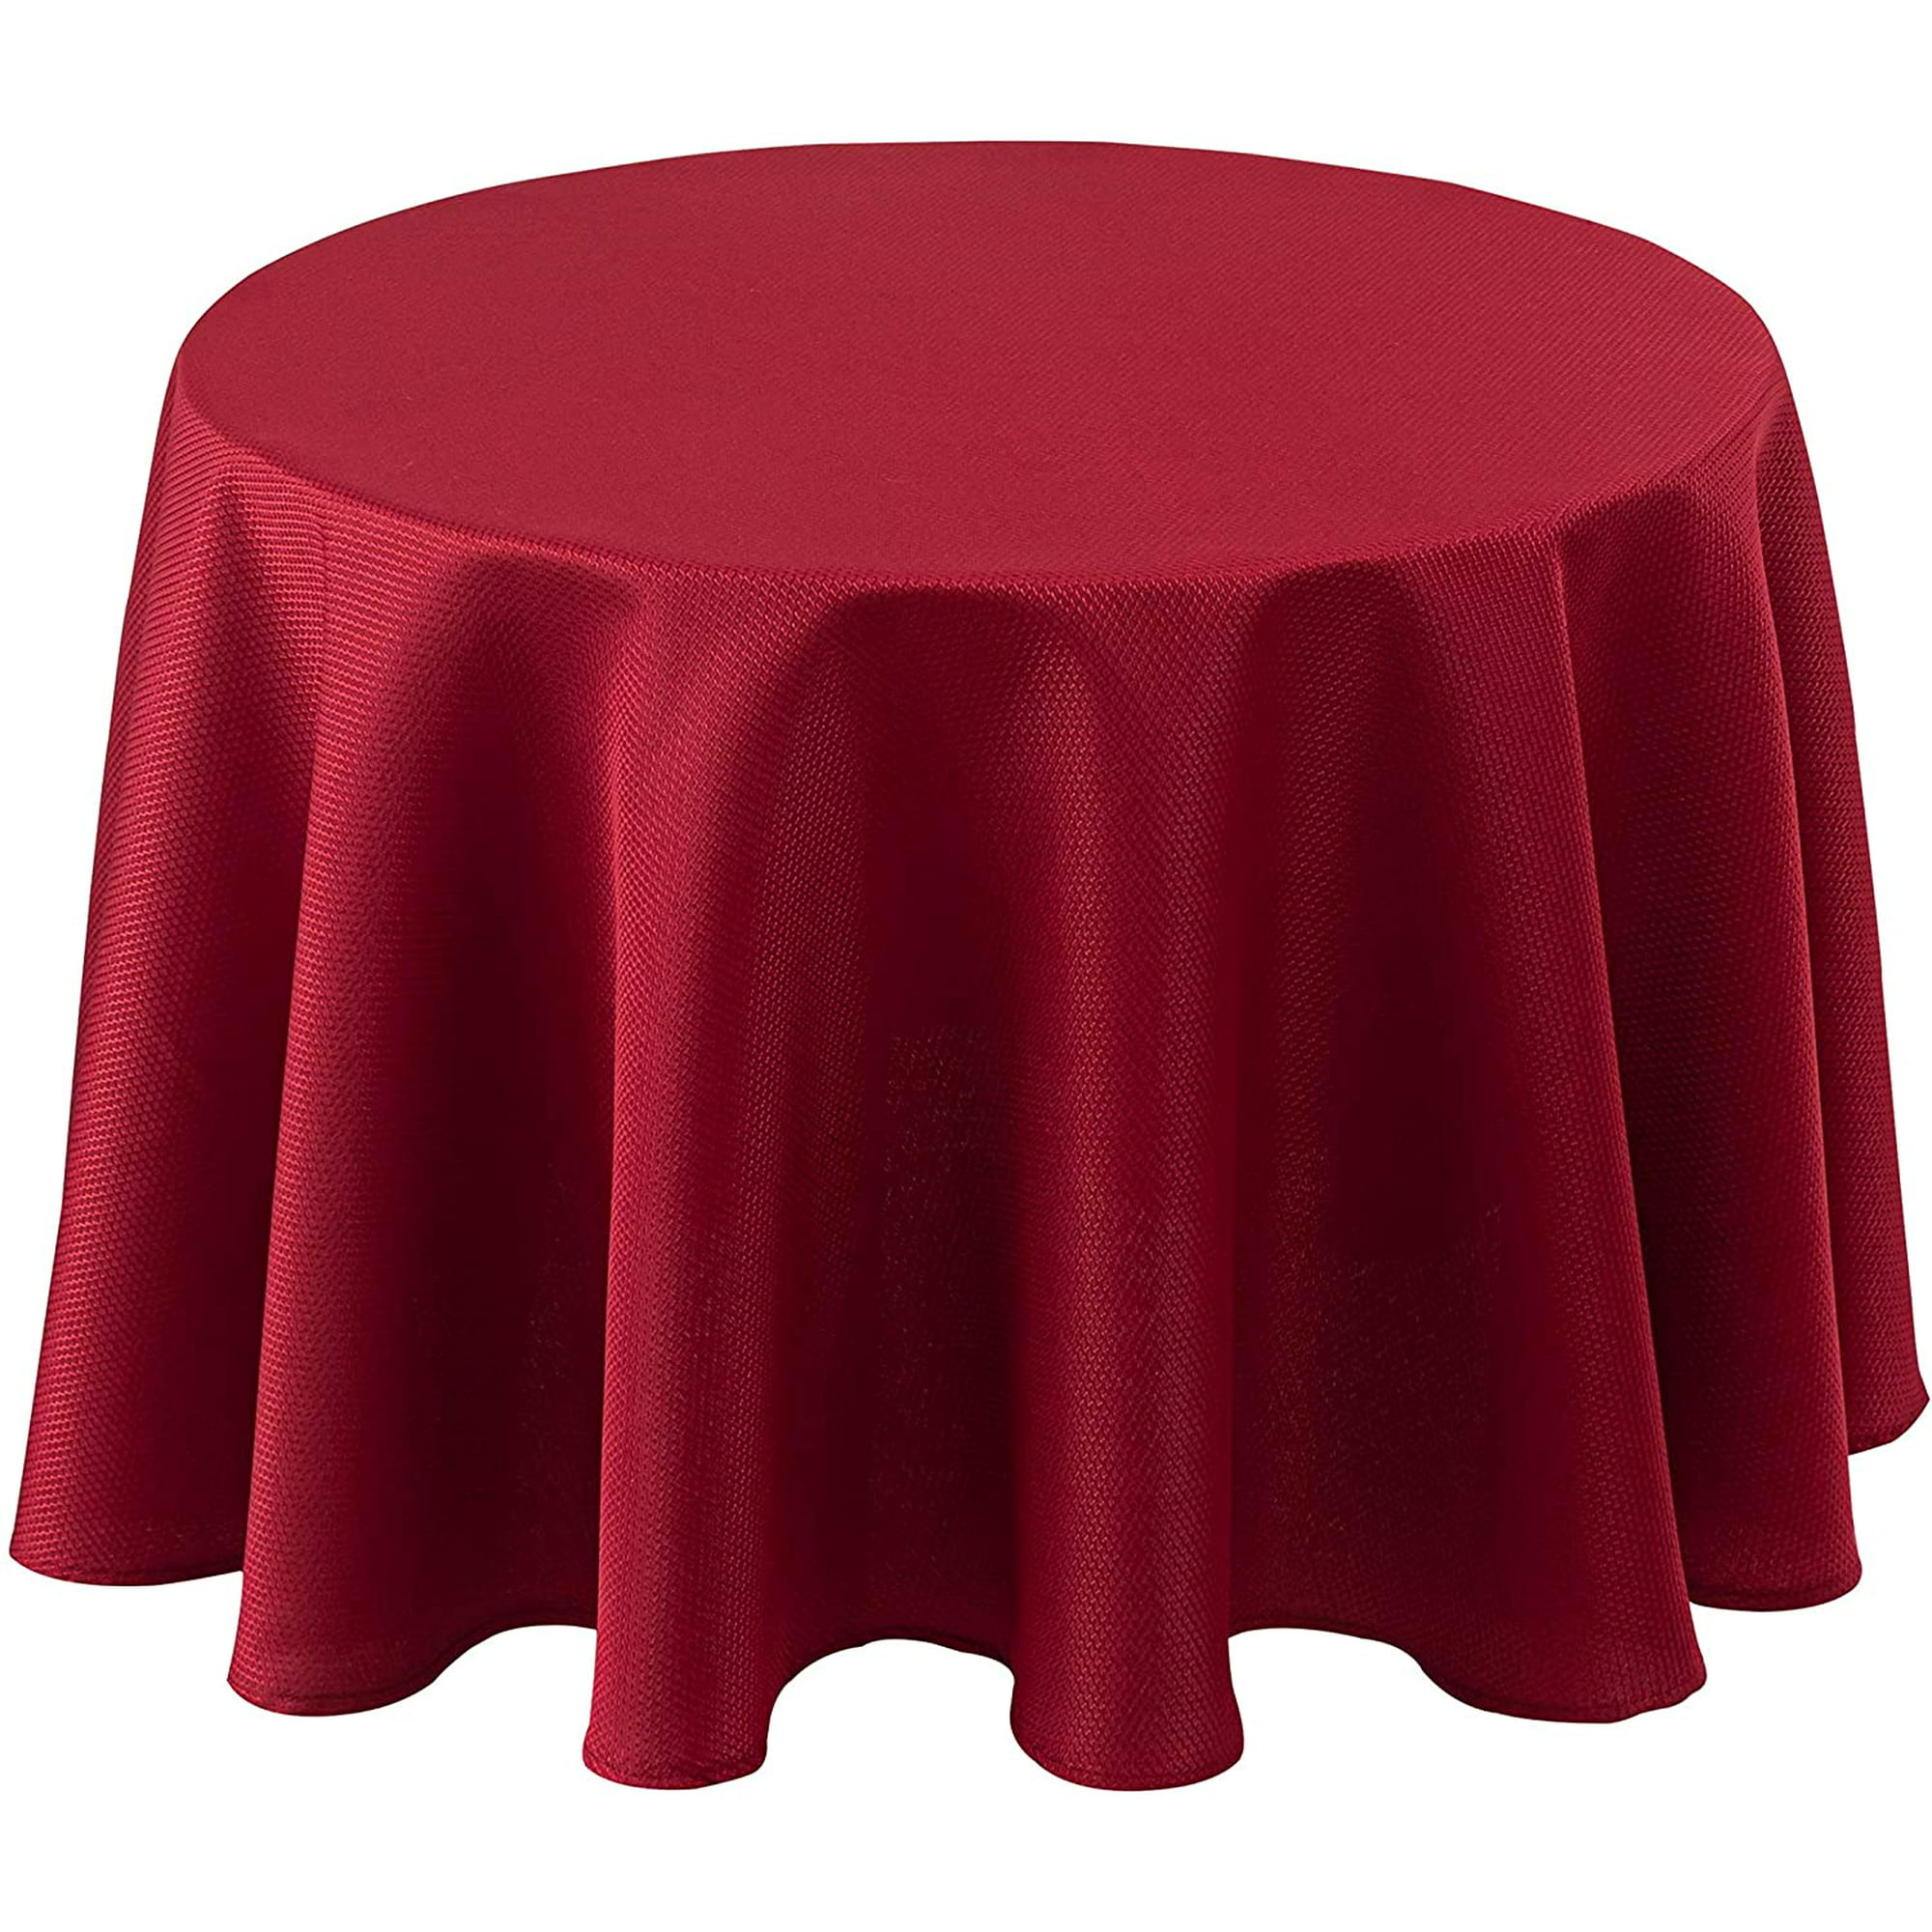 Biscaynebay Textured Fabric Tablecloths 70 Inches in Diameter Round, Red  Water Resistant Spill Proof Machine Washable Tablecloths for Dining,  Kitchen, Wedding & Parties,etc Machine Washable | Walmart Canada